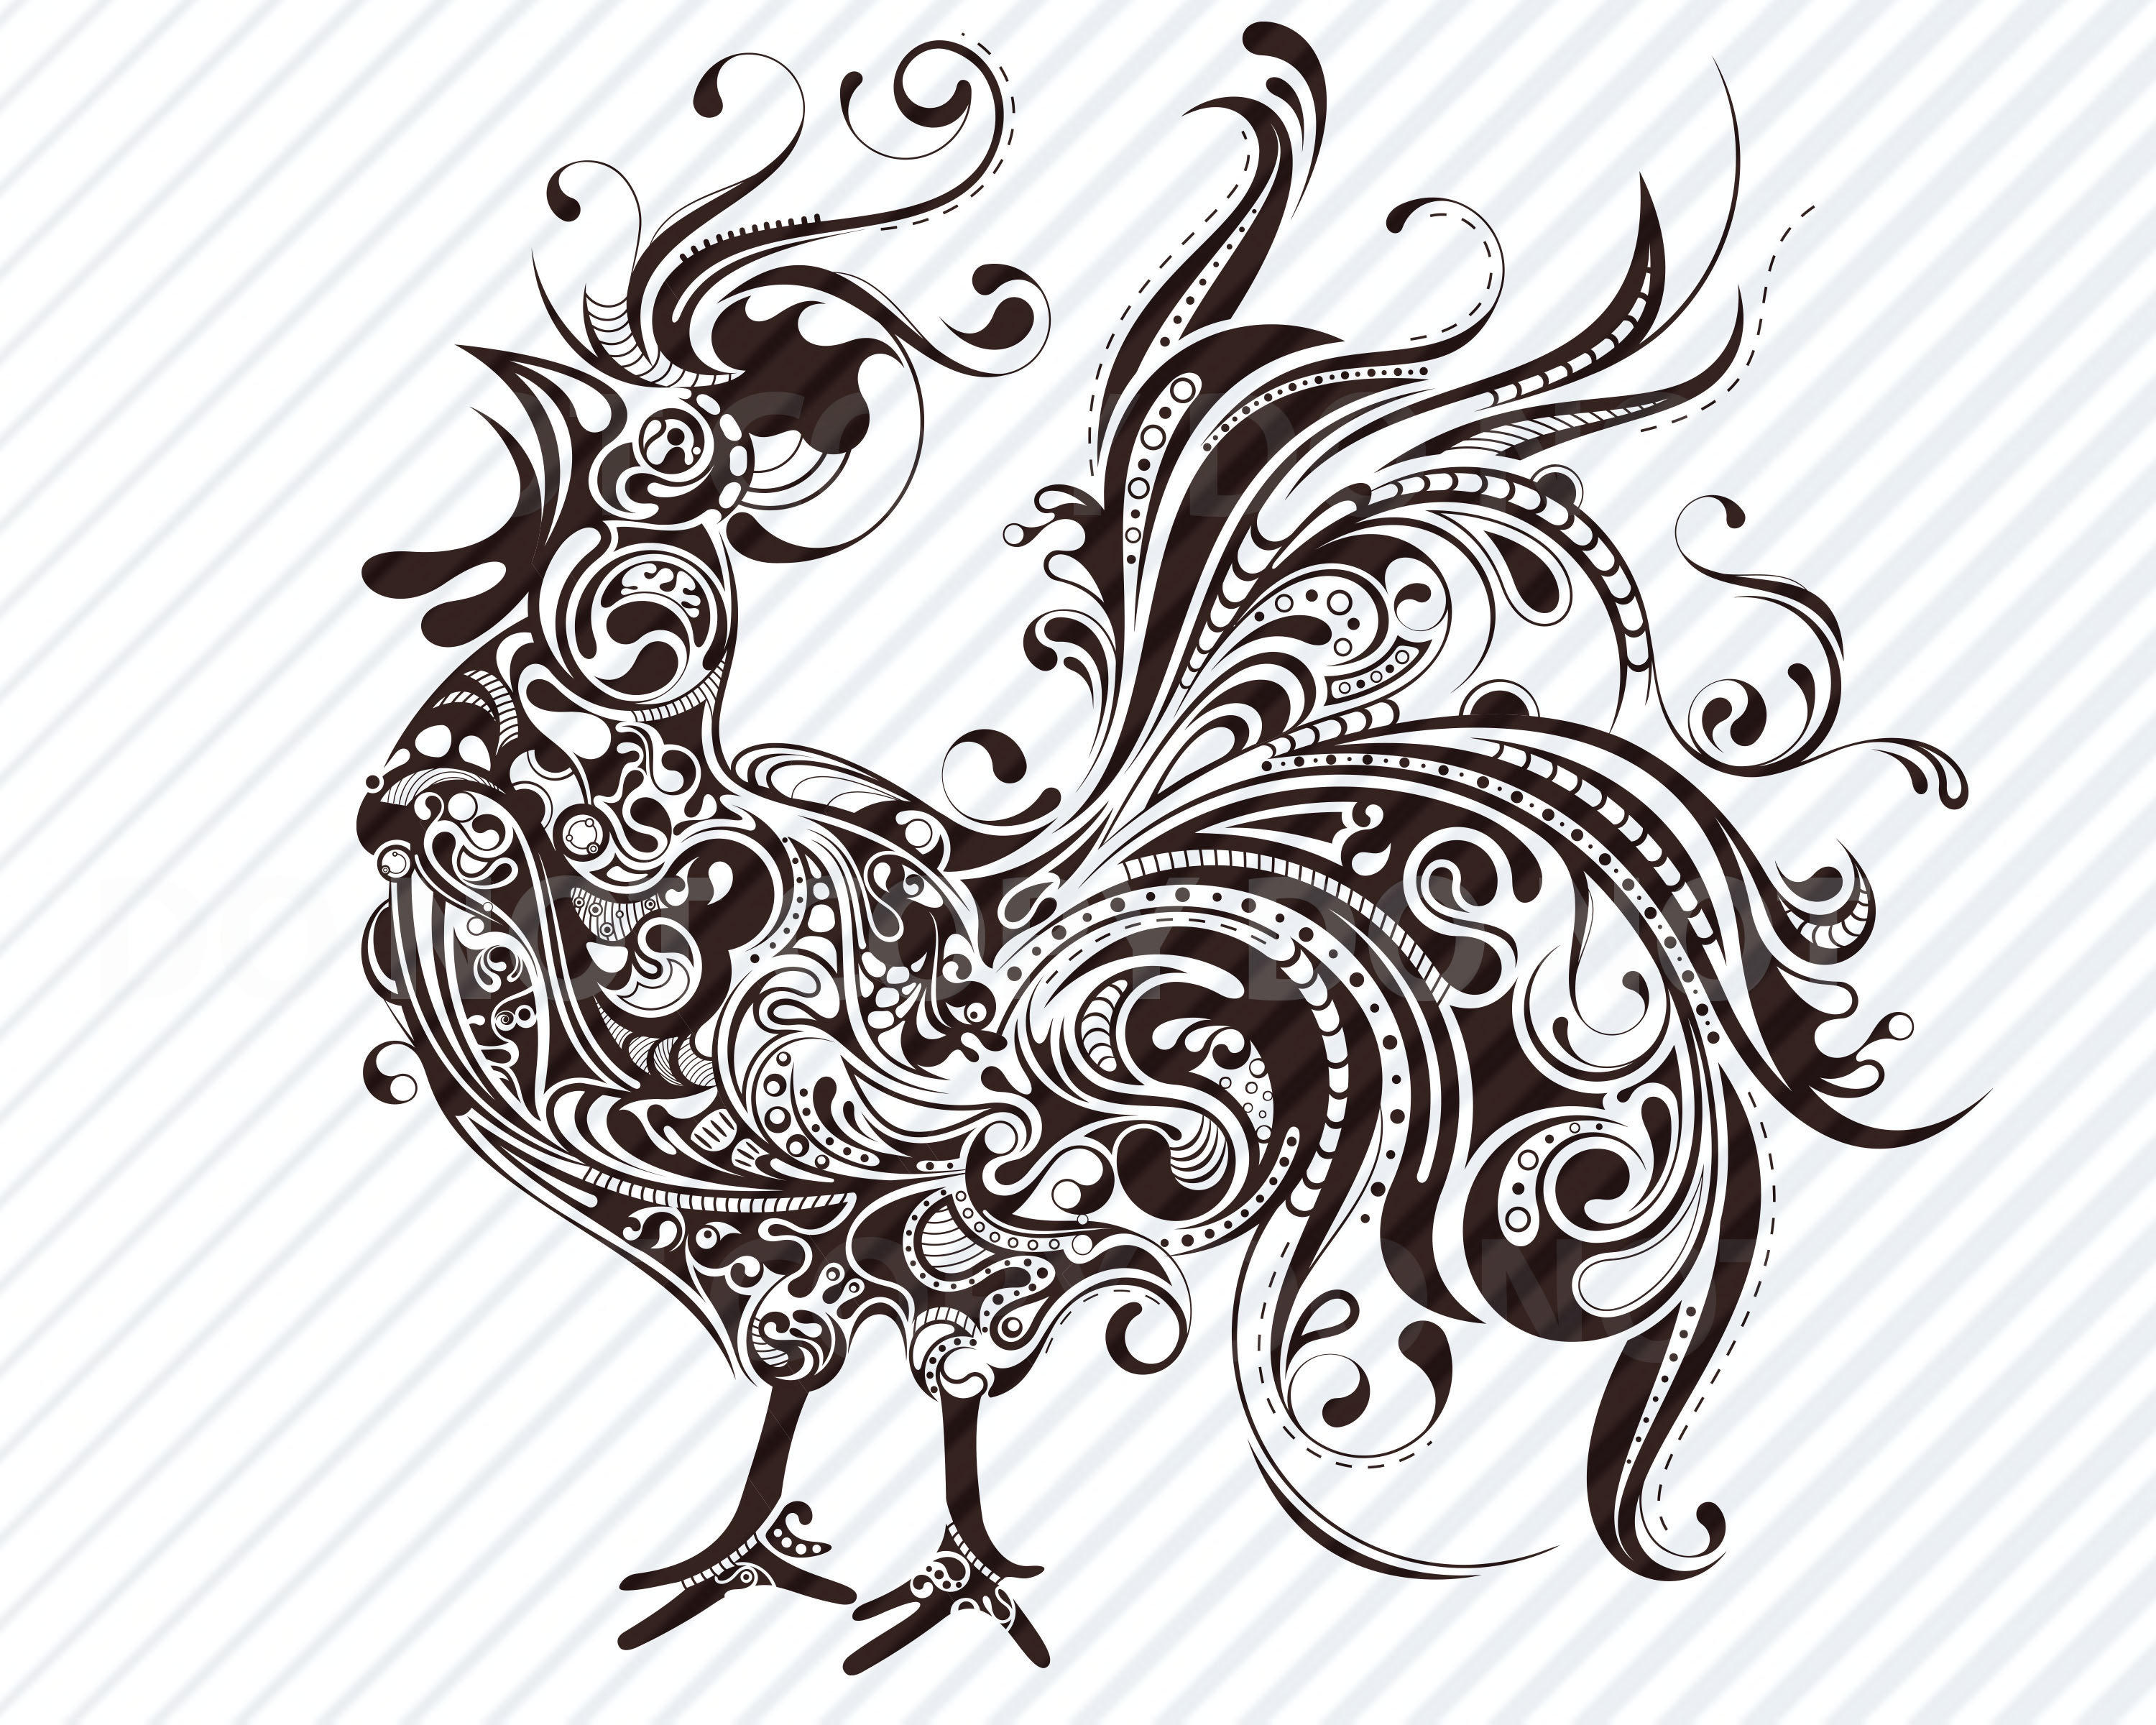 Rooster Art SVG Files Clipart Clip Art Silhouette Vector Images